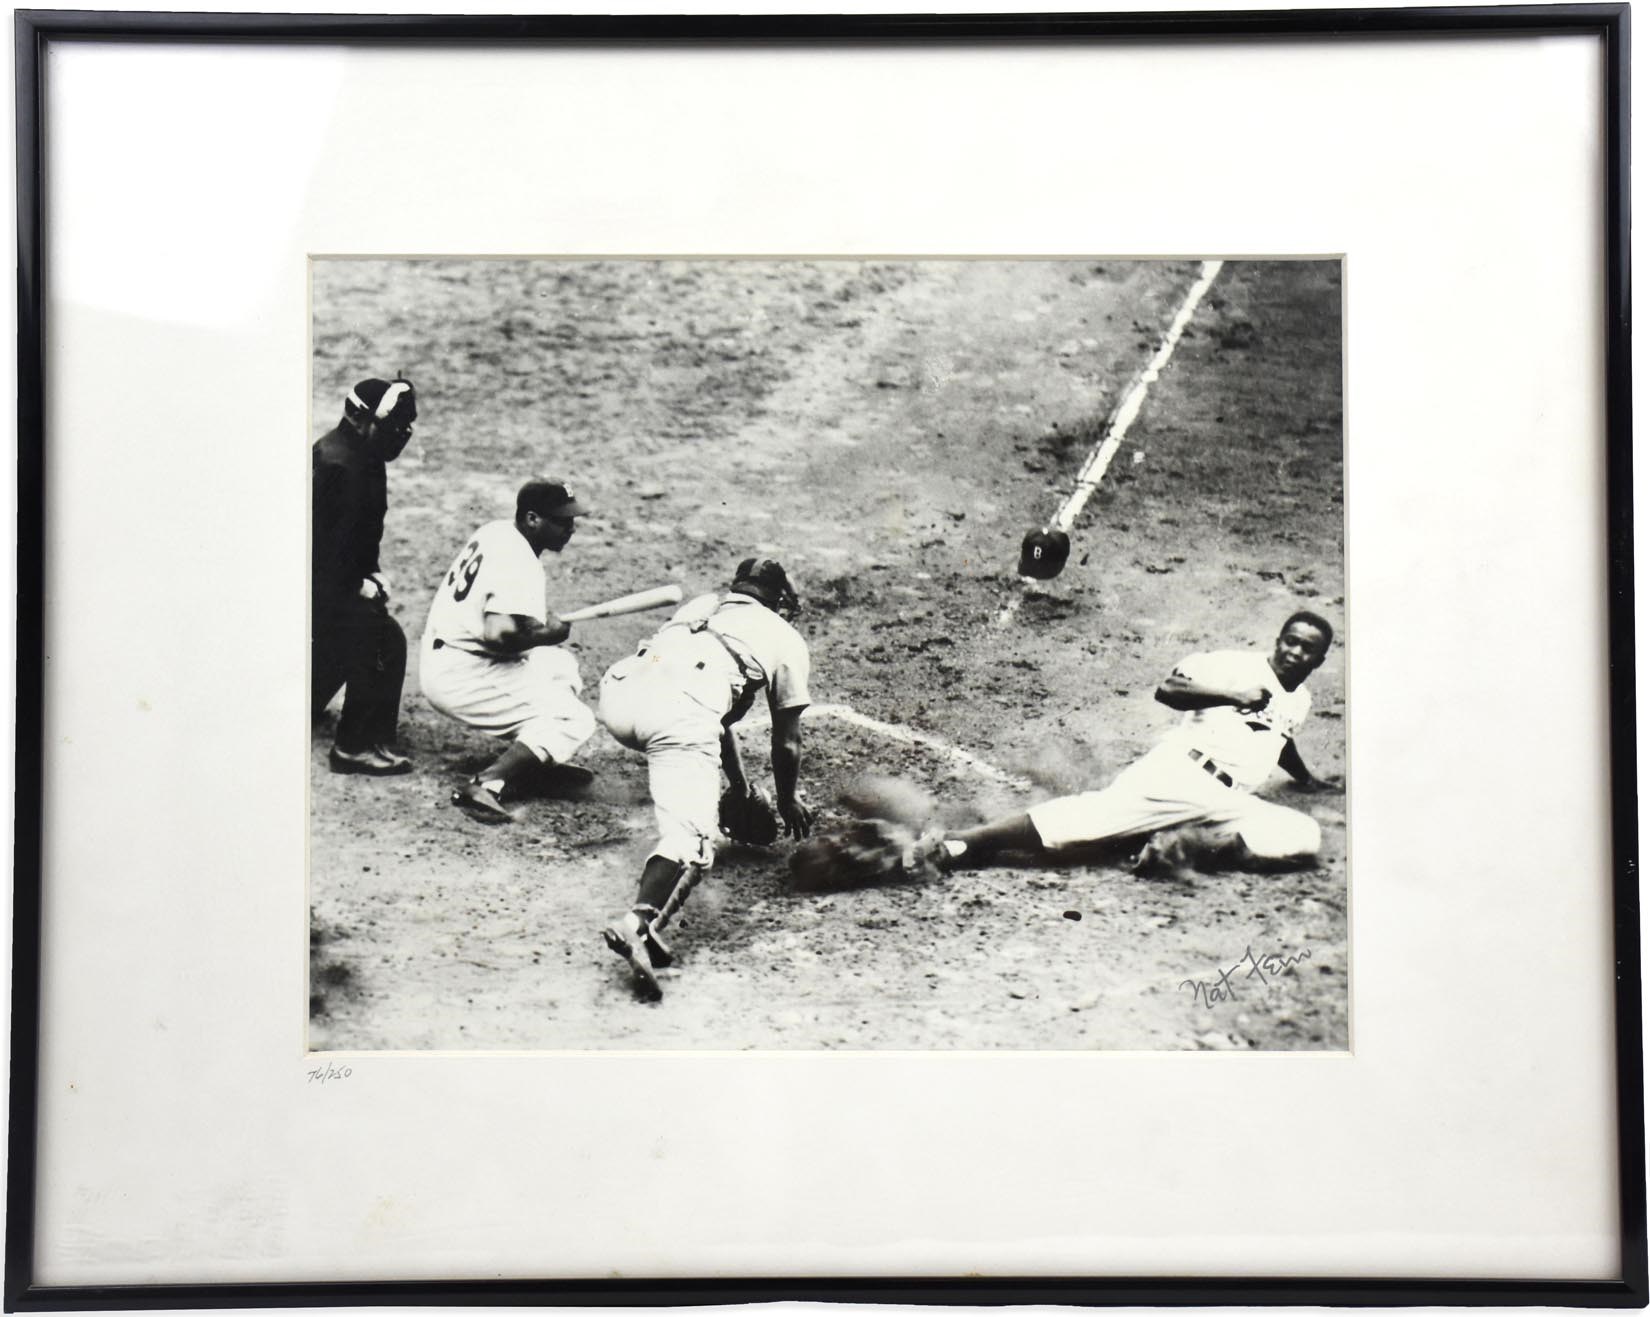 Jackie Robinson & Brooklyn Dodgers - Jackie Robinson "Stealing Home" Photograph Signed & by Pulitzer Prize Winner Nat Fein